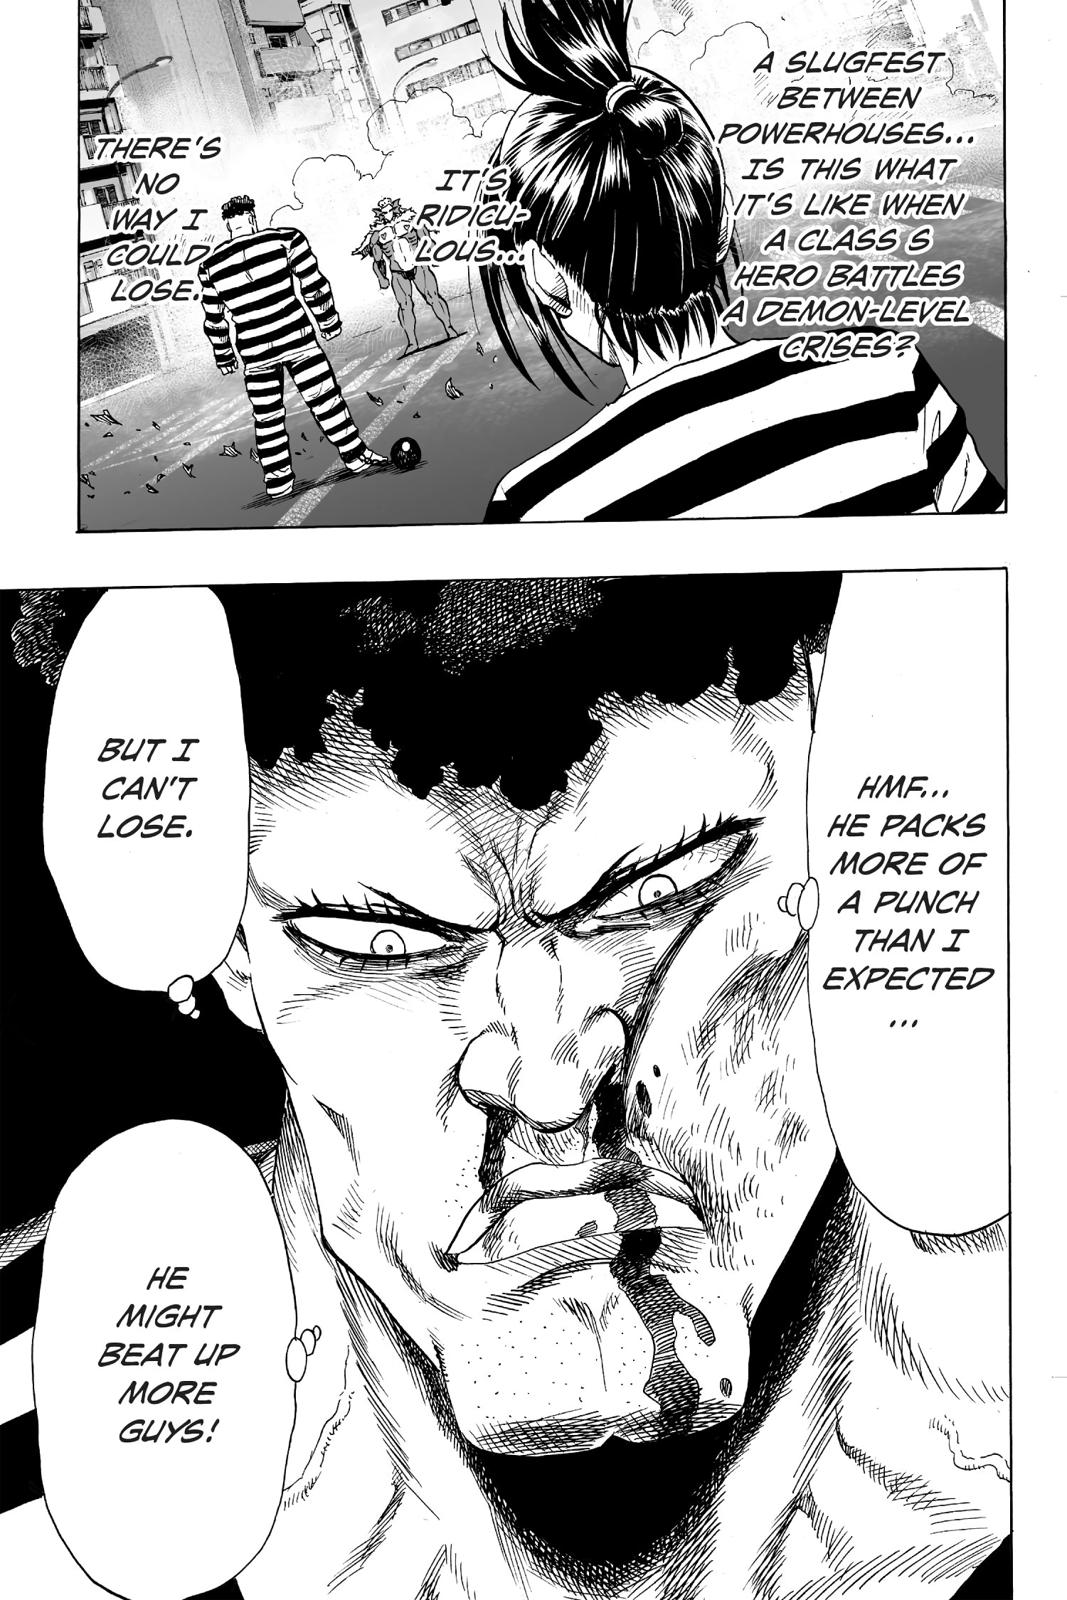 One-Punch Man, Punch 25 image 17